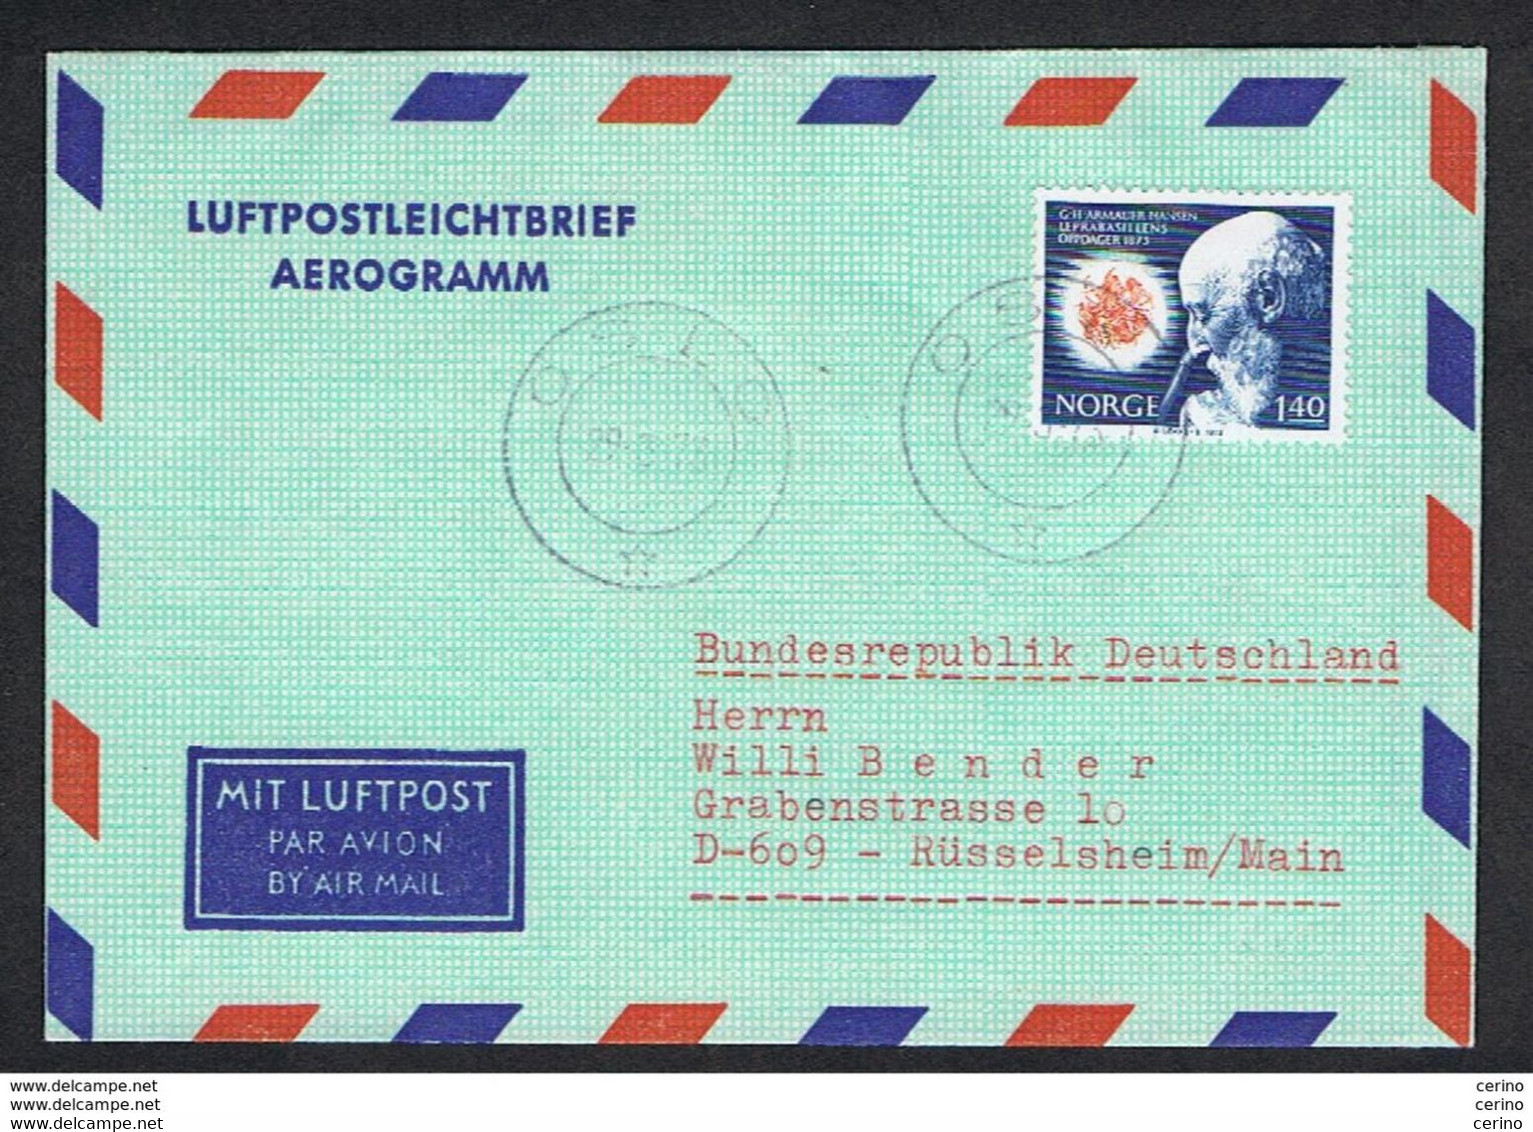 NORWAY: 1973 TWO  AIR MAIL COUVERTS: 100 Ore  + 140 Ore (614 + 615) - BOTH TO GERMANY - Covers & Documents